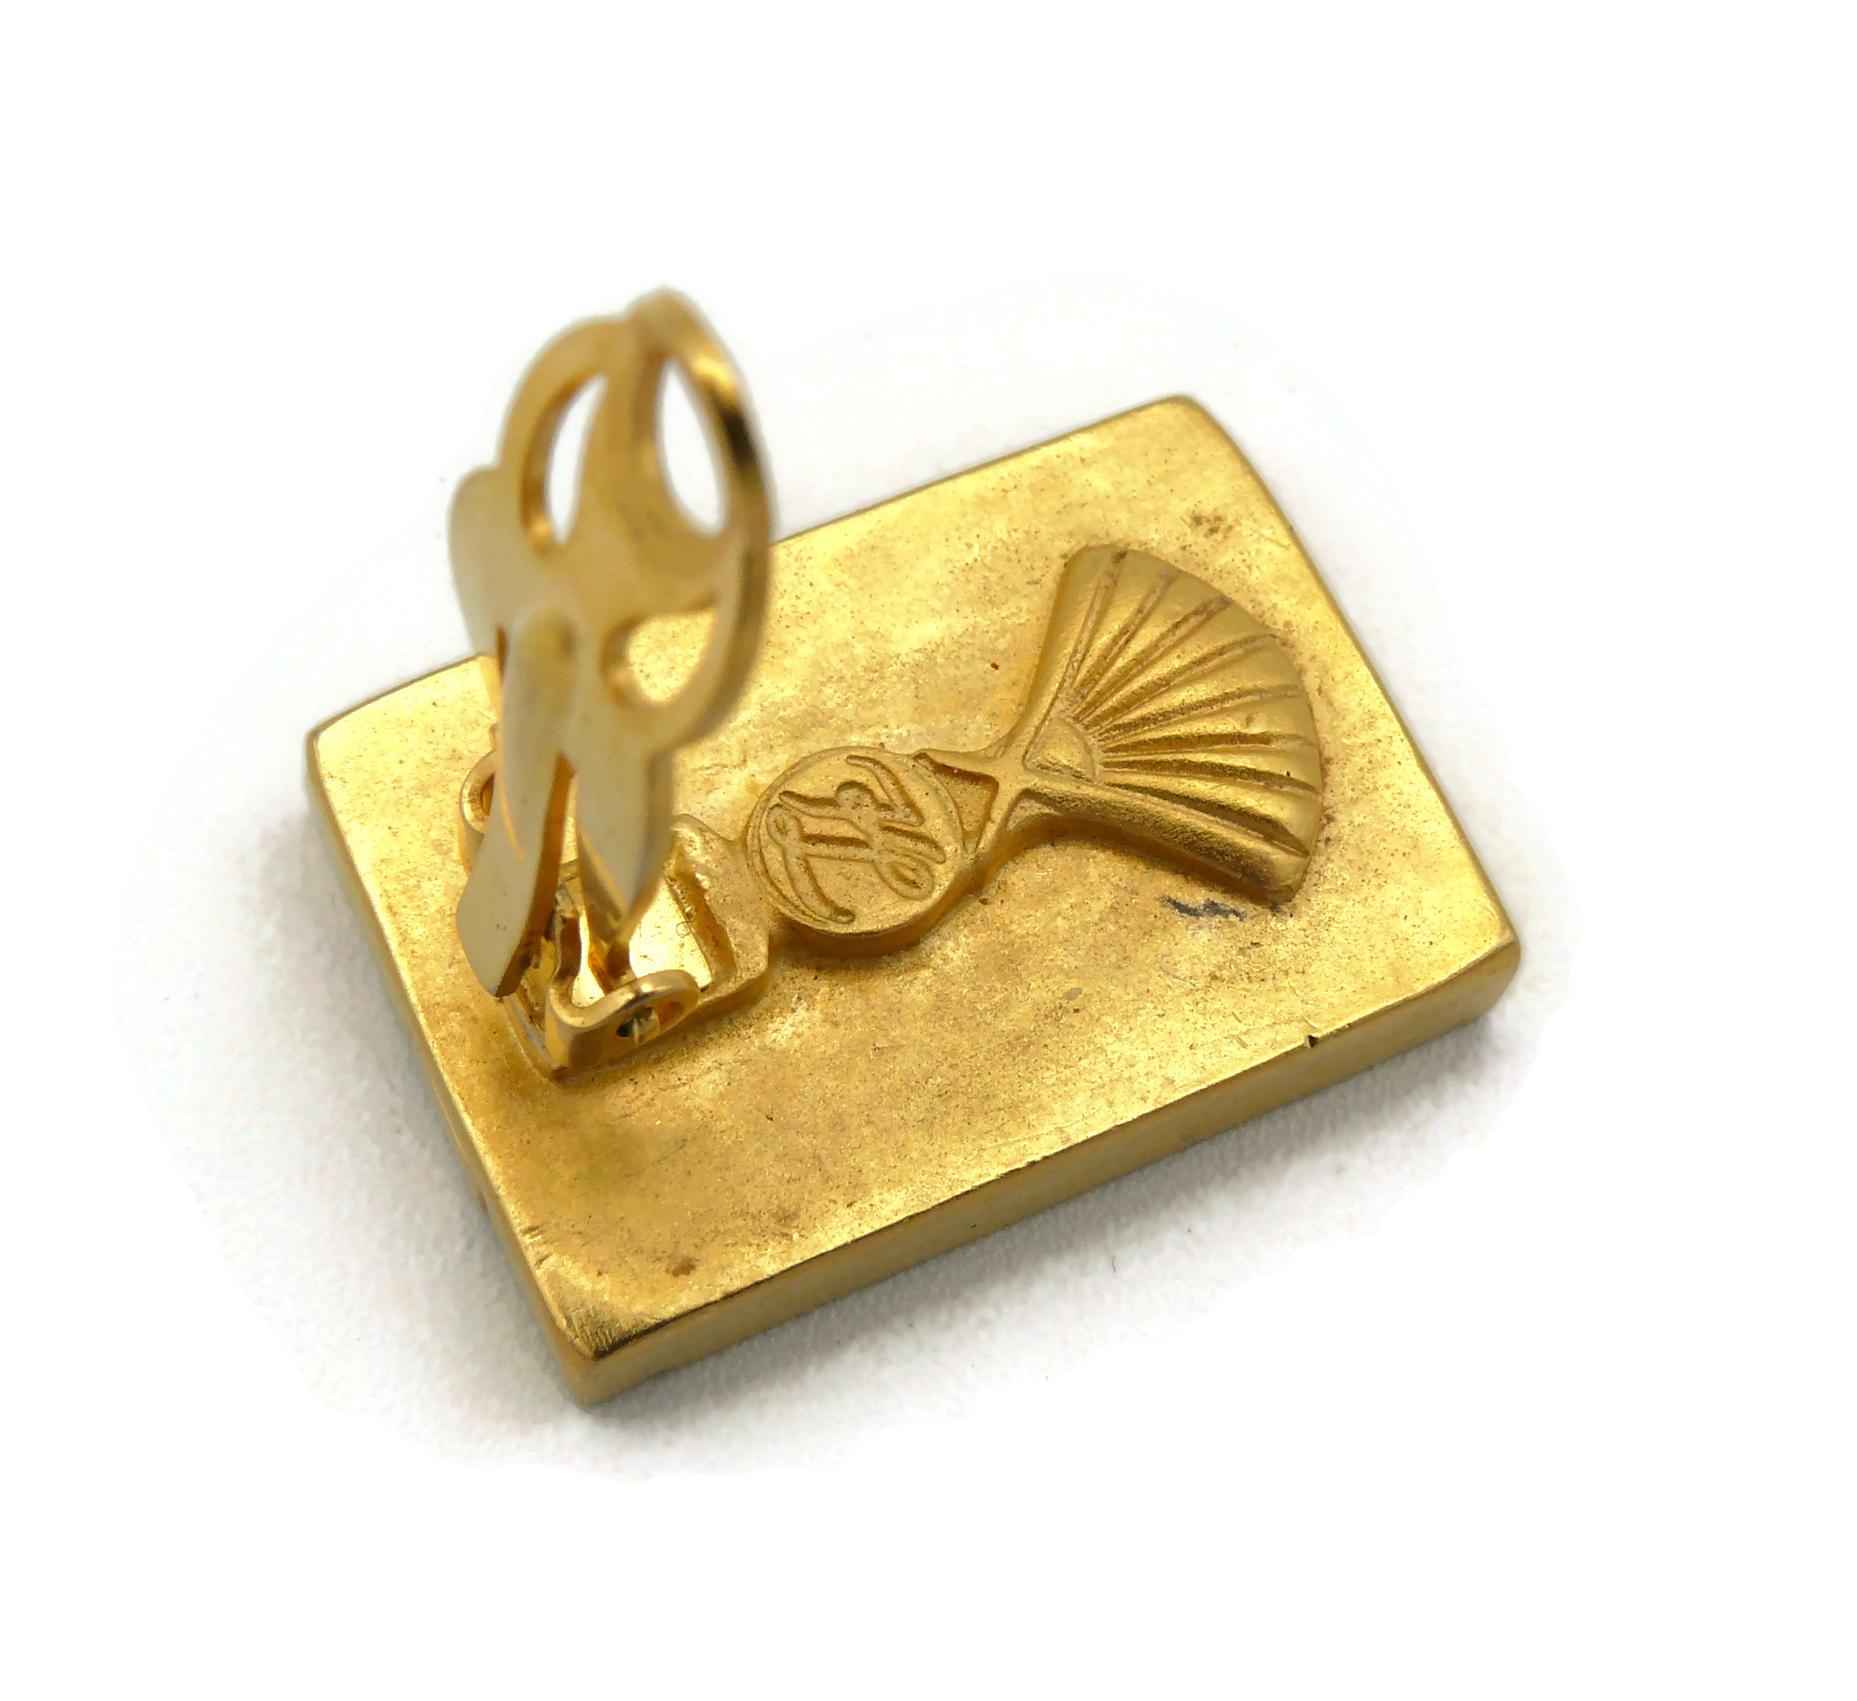 Karl Lagerfeld Vintage Gold Toned Book Spines Clip-On Earrings For Sale 2